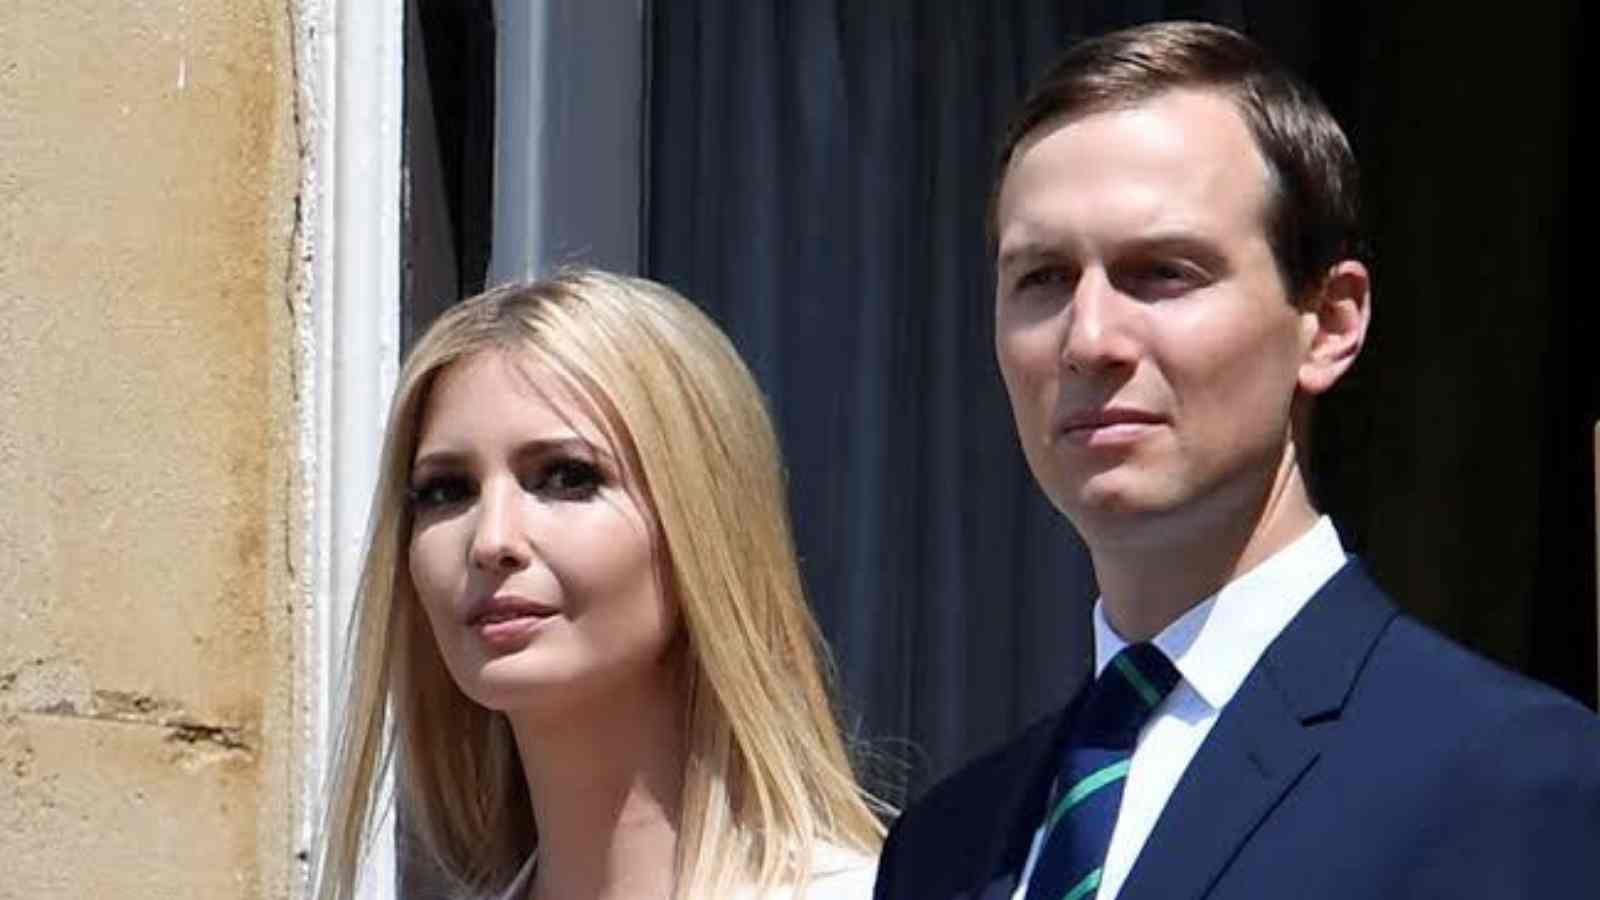 Jared Kushner didn't tell his wife, Ivanka Trump, about his cancer diagnosis